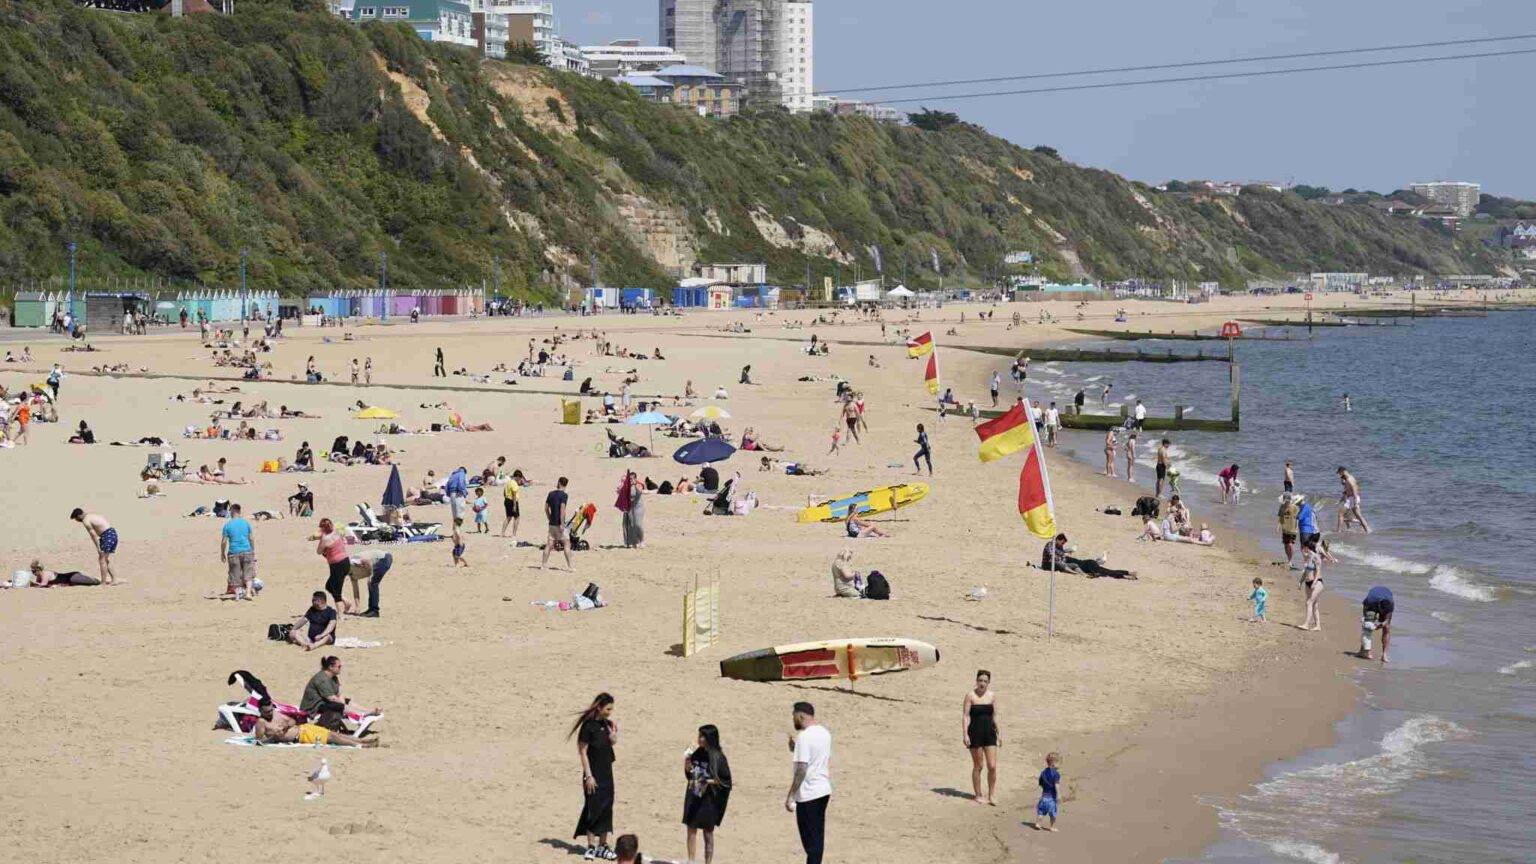 Bank holiday weekend could see hottest day of the year so far with sunny weather for ‘vast majority’ of UK